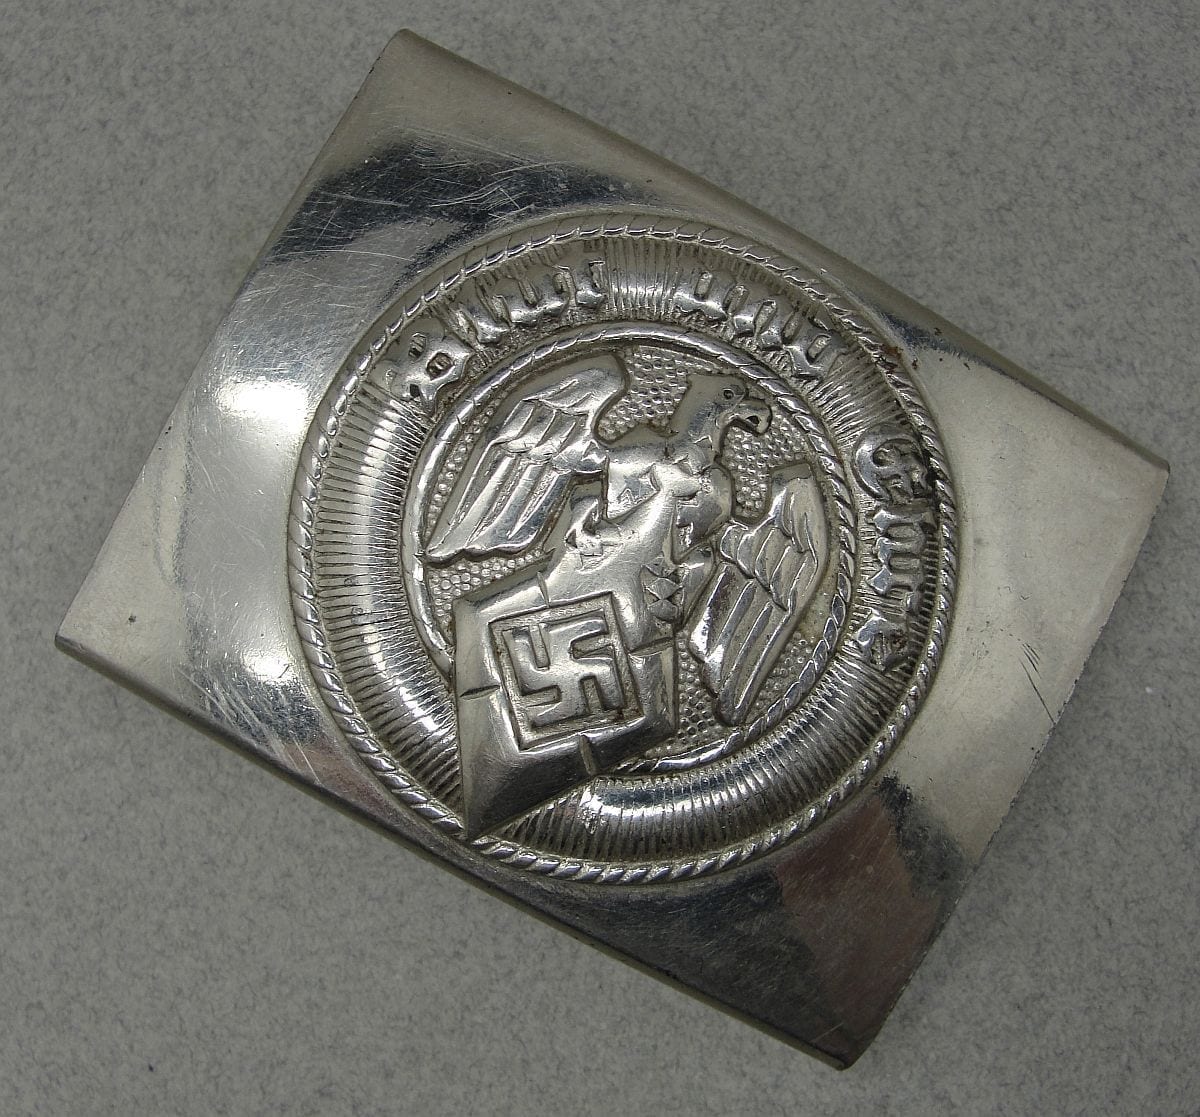 Hitler Youth Belt Buckle by "RZM M4/23"